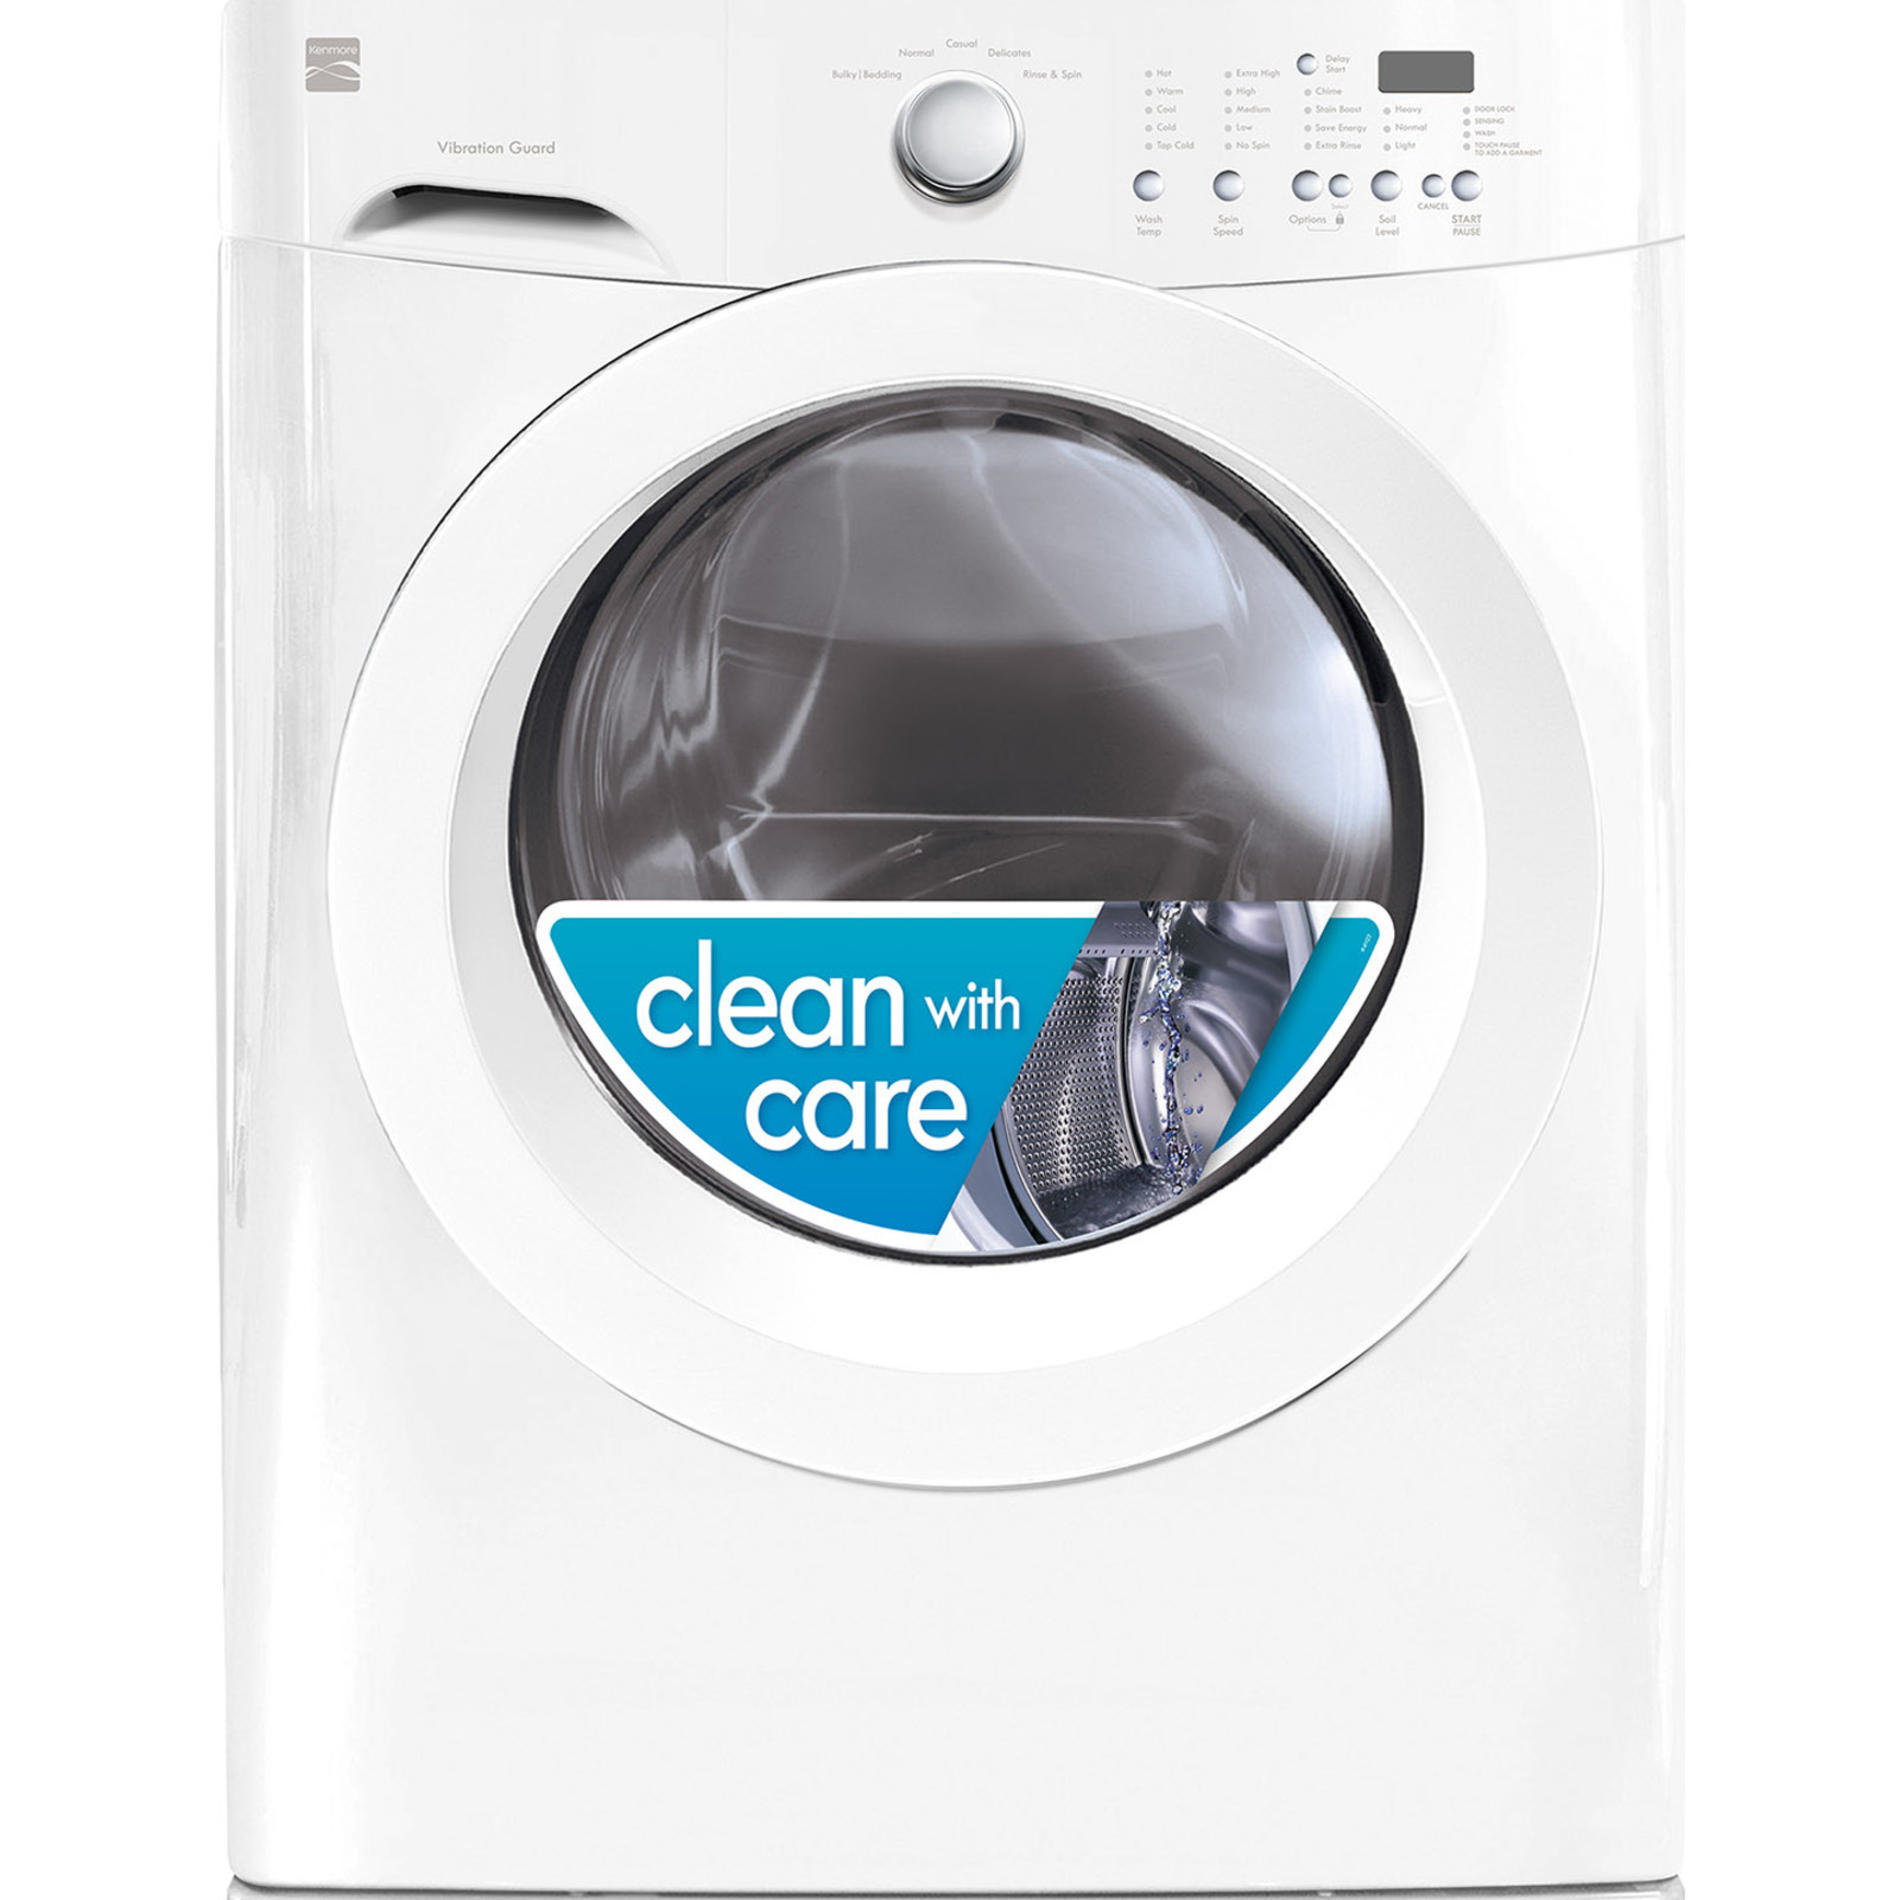 Kenmore 41122 3.9 cu. ft. Front-Load Washer - White